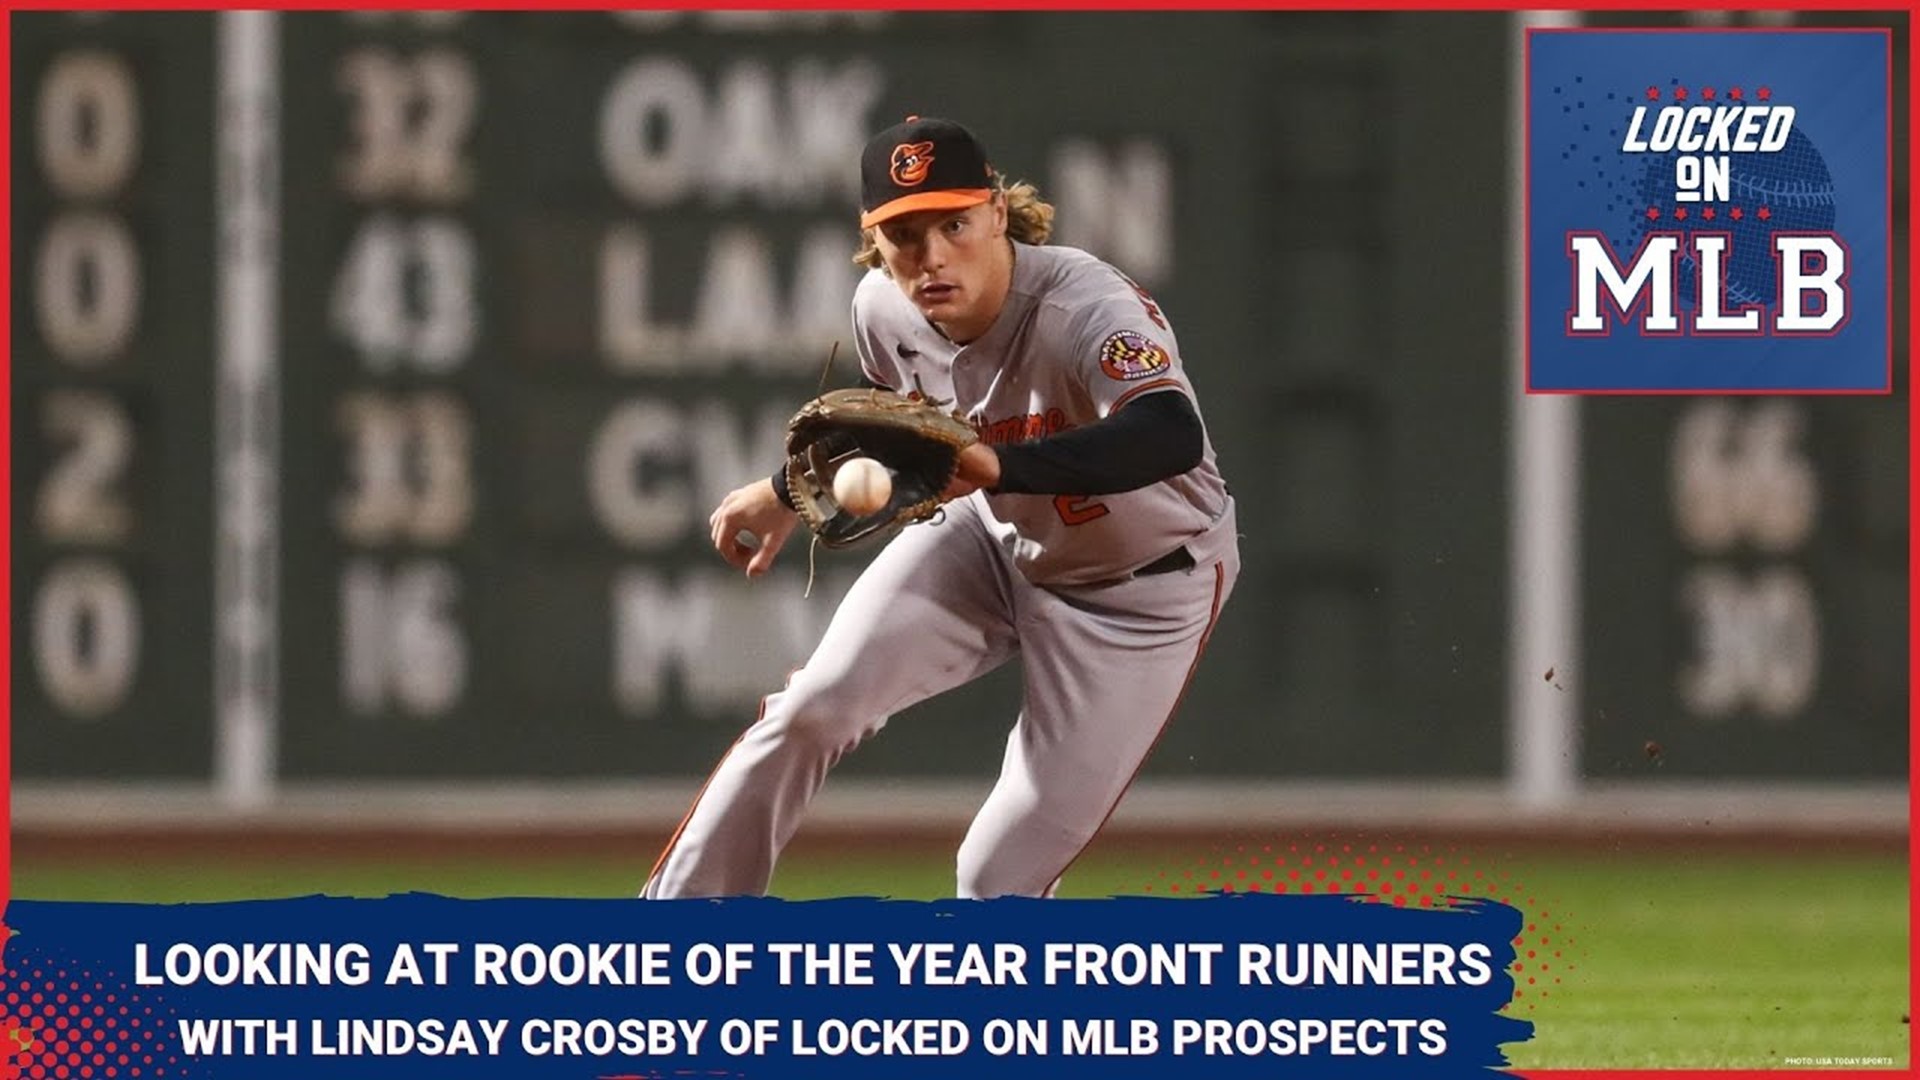 Locked on MLB - Previewing Rookie of the Year Favorites with Lindsay Crosby